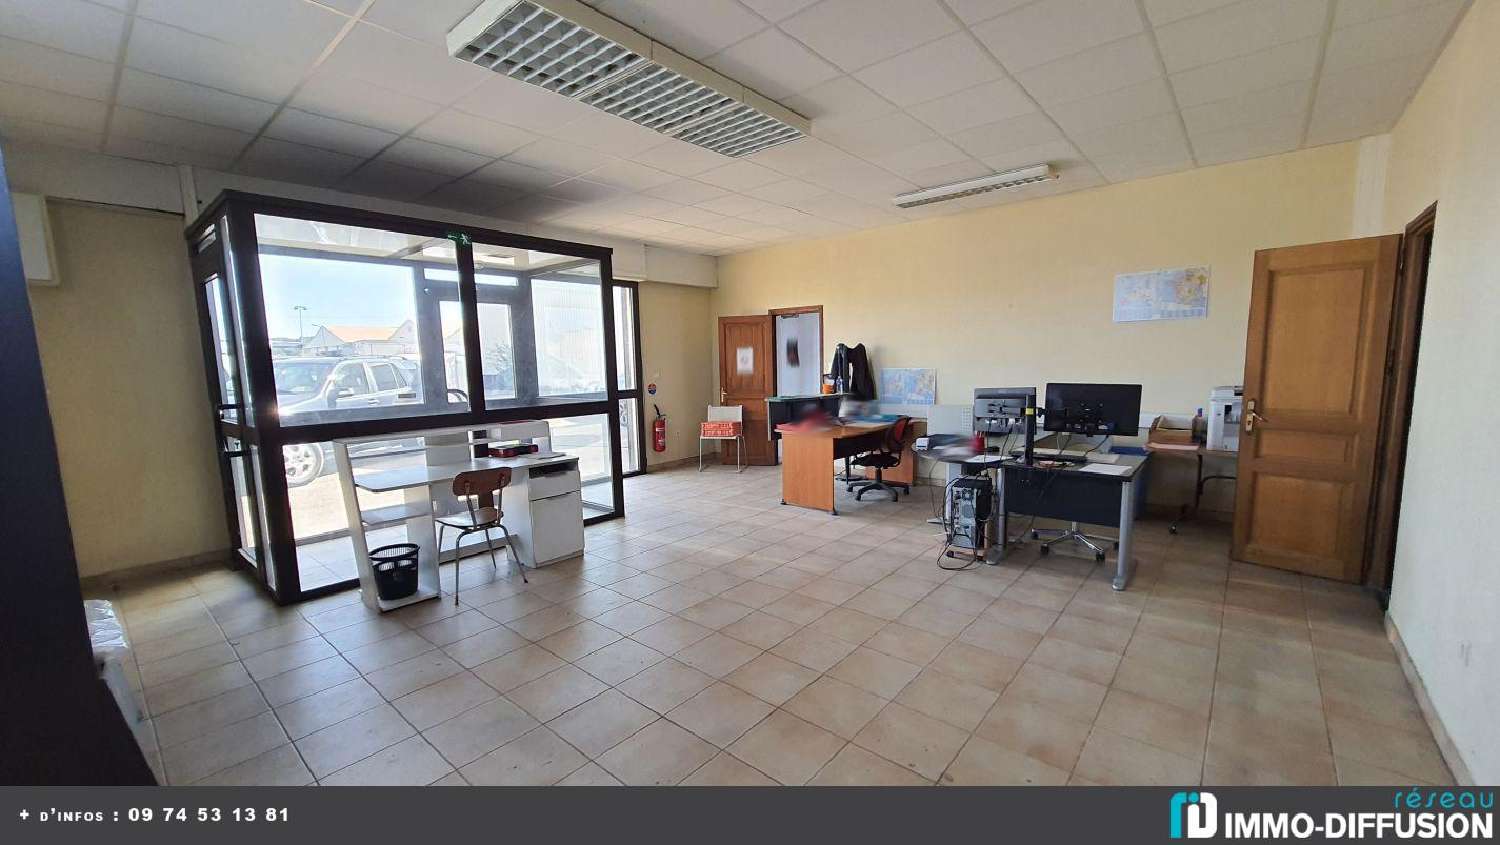  for sale commercial Narbonne Aude 1